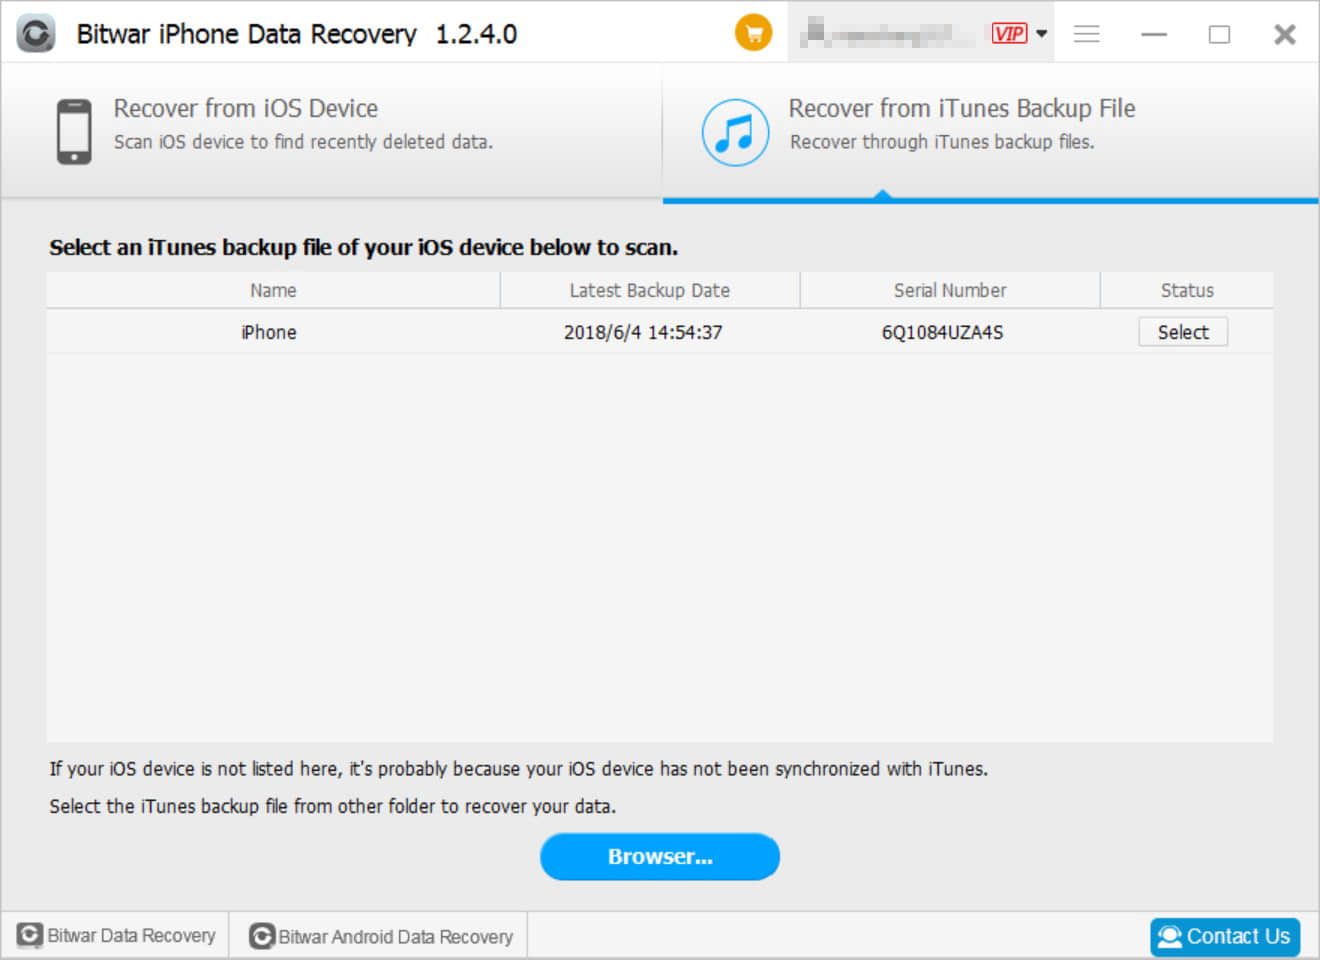 8.Bitwar iPhone Data Recovery - Select Backup File